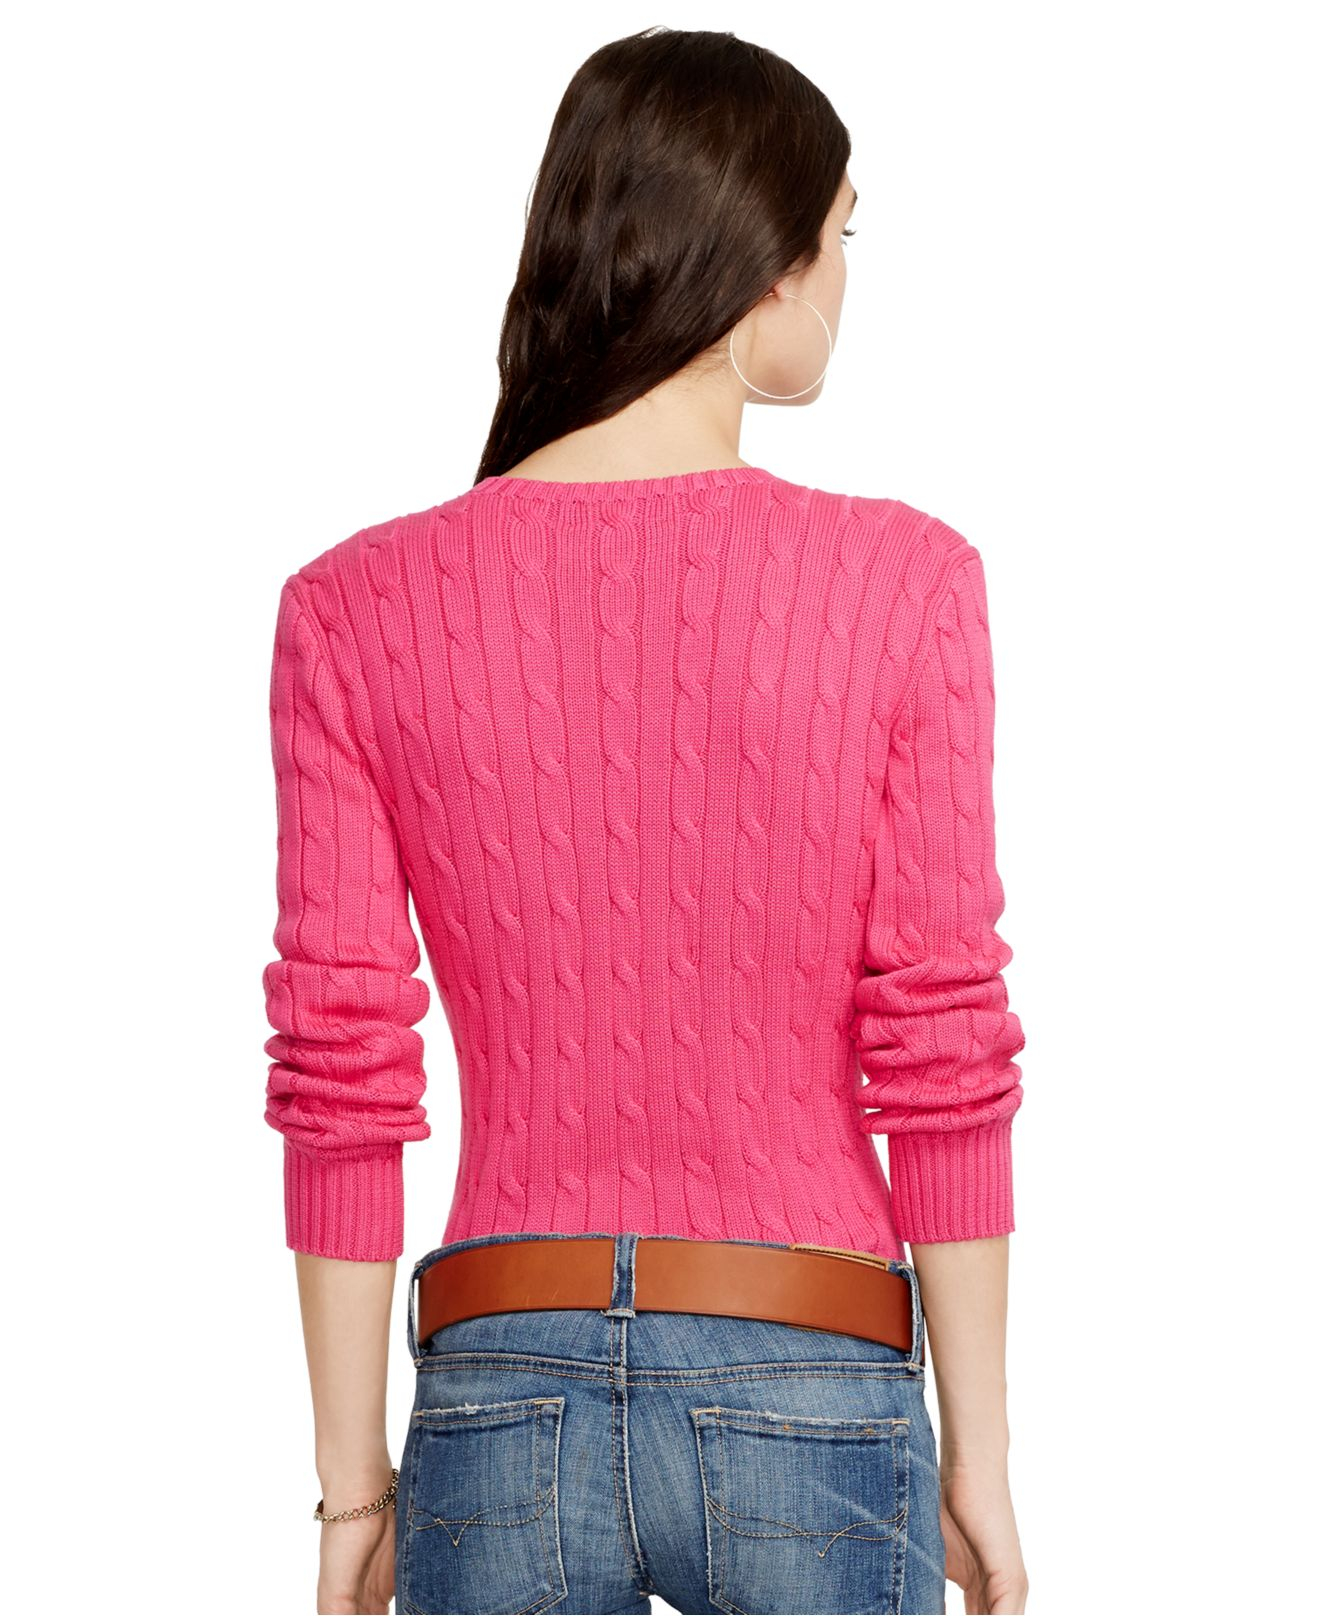 Polo Ralph Lauren Crew-Neck Cable-Knit Sweater in Pink - Lyst